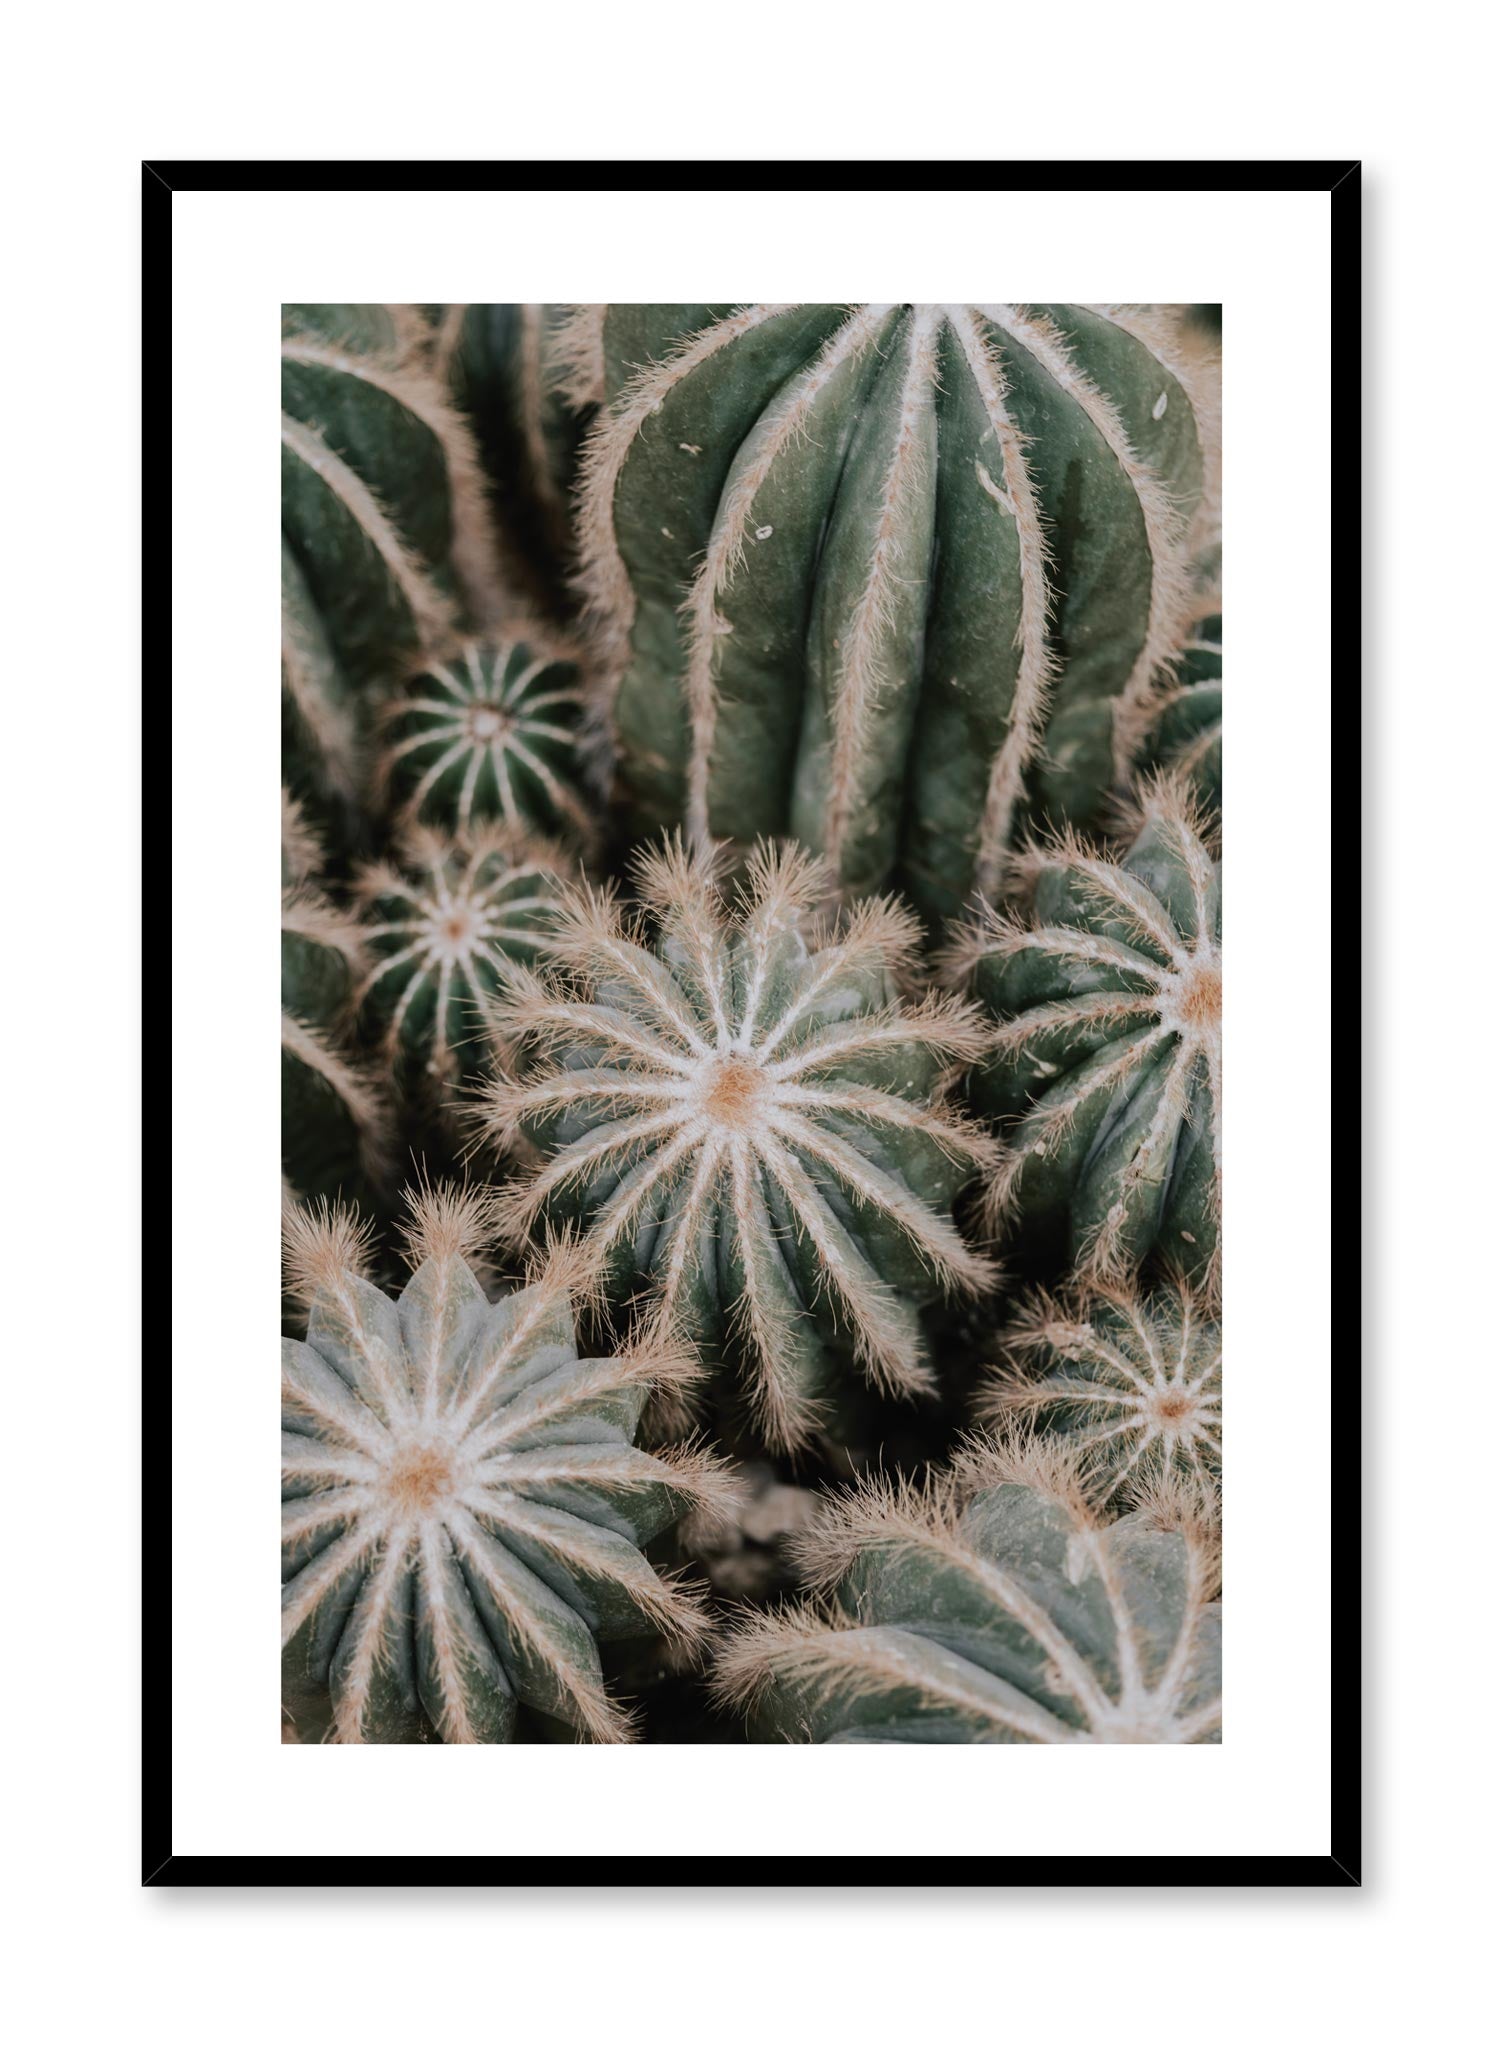 Minimalist design poster by Opposite Wall with Cacti botanical photography